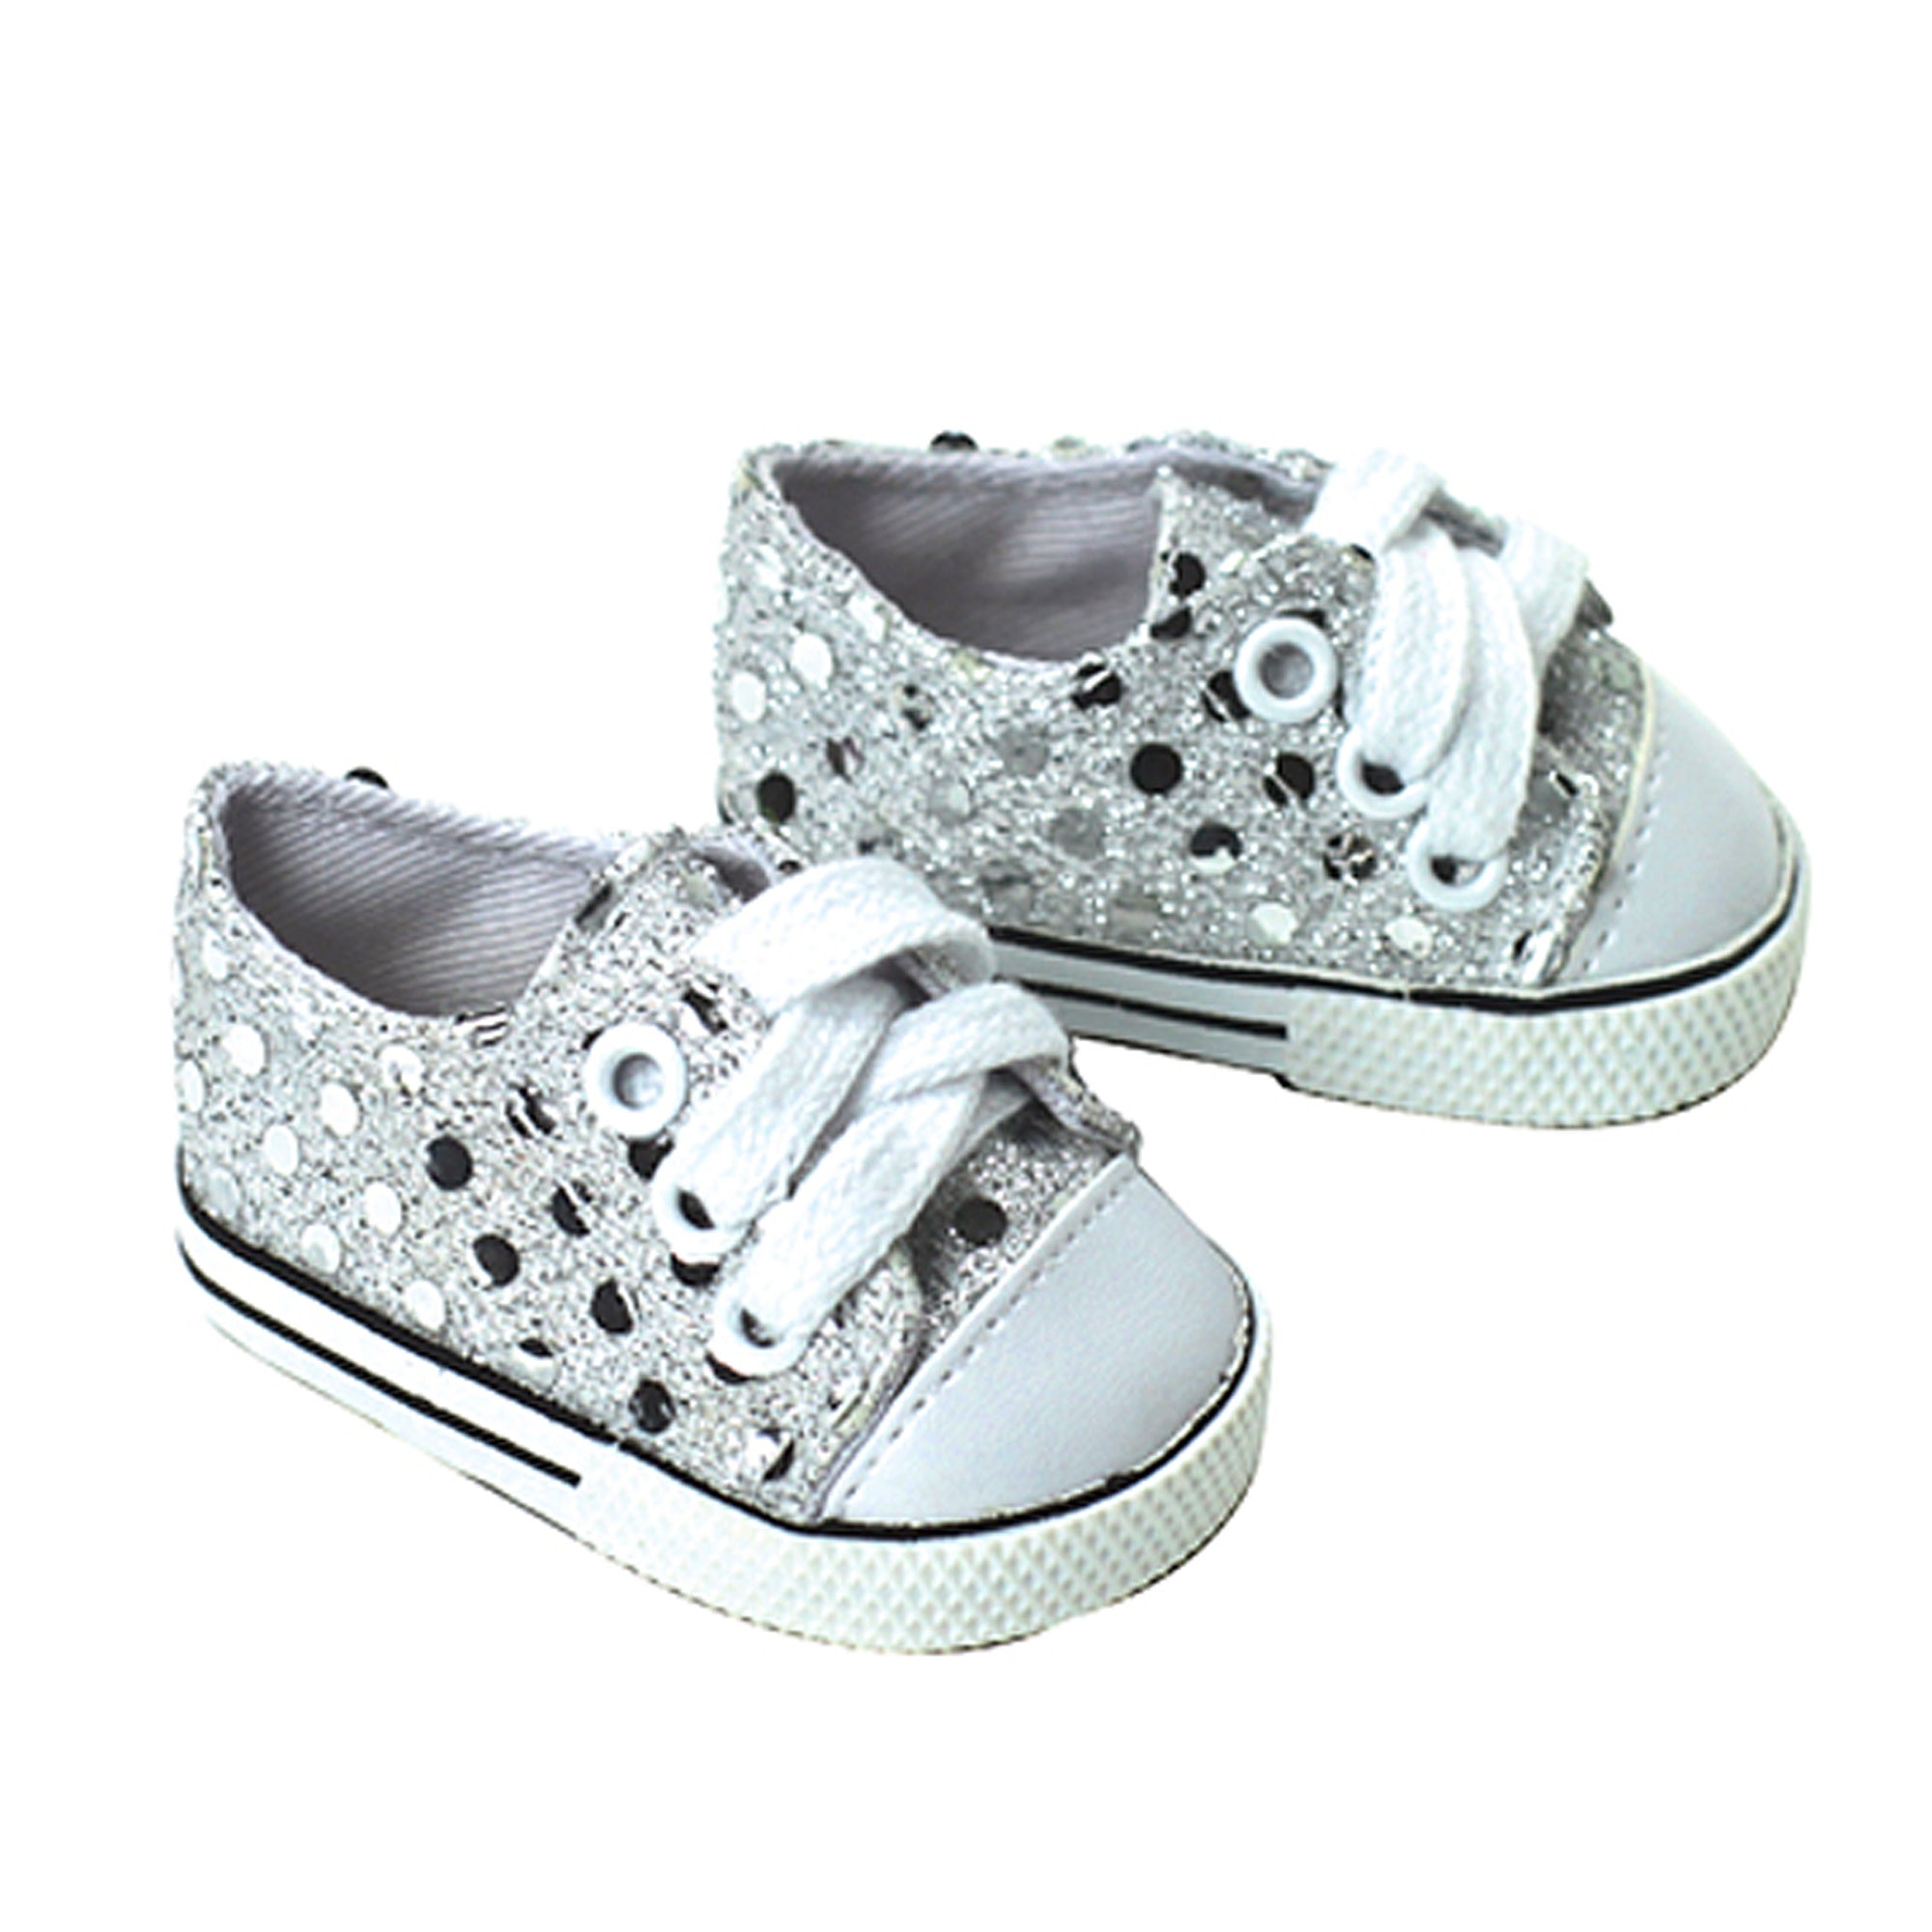 Sophia’s Silver Sequin Sneaker Shoes with Laces for 18" Dolls